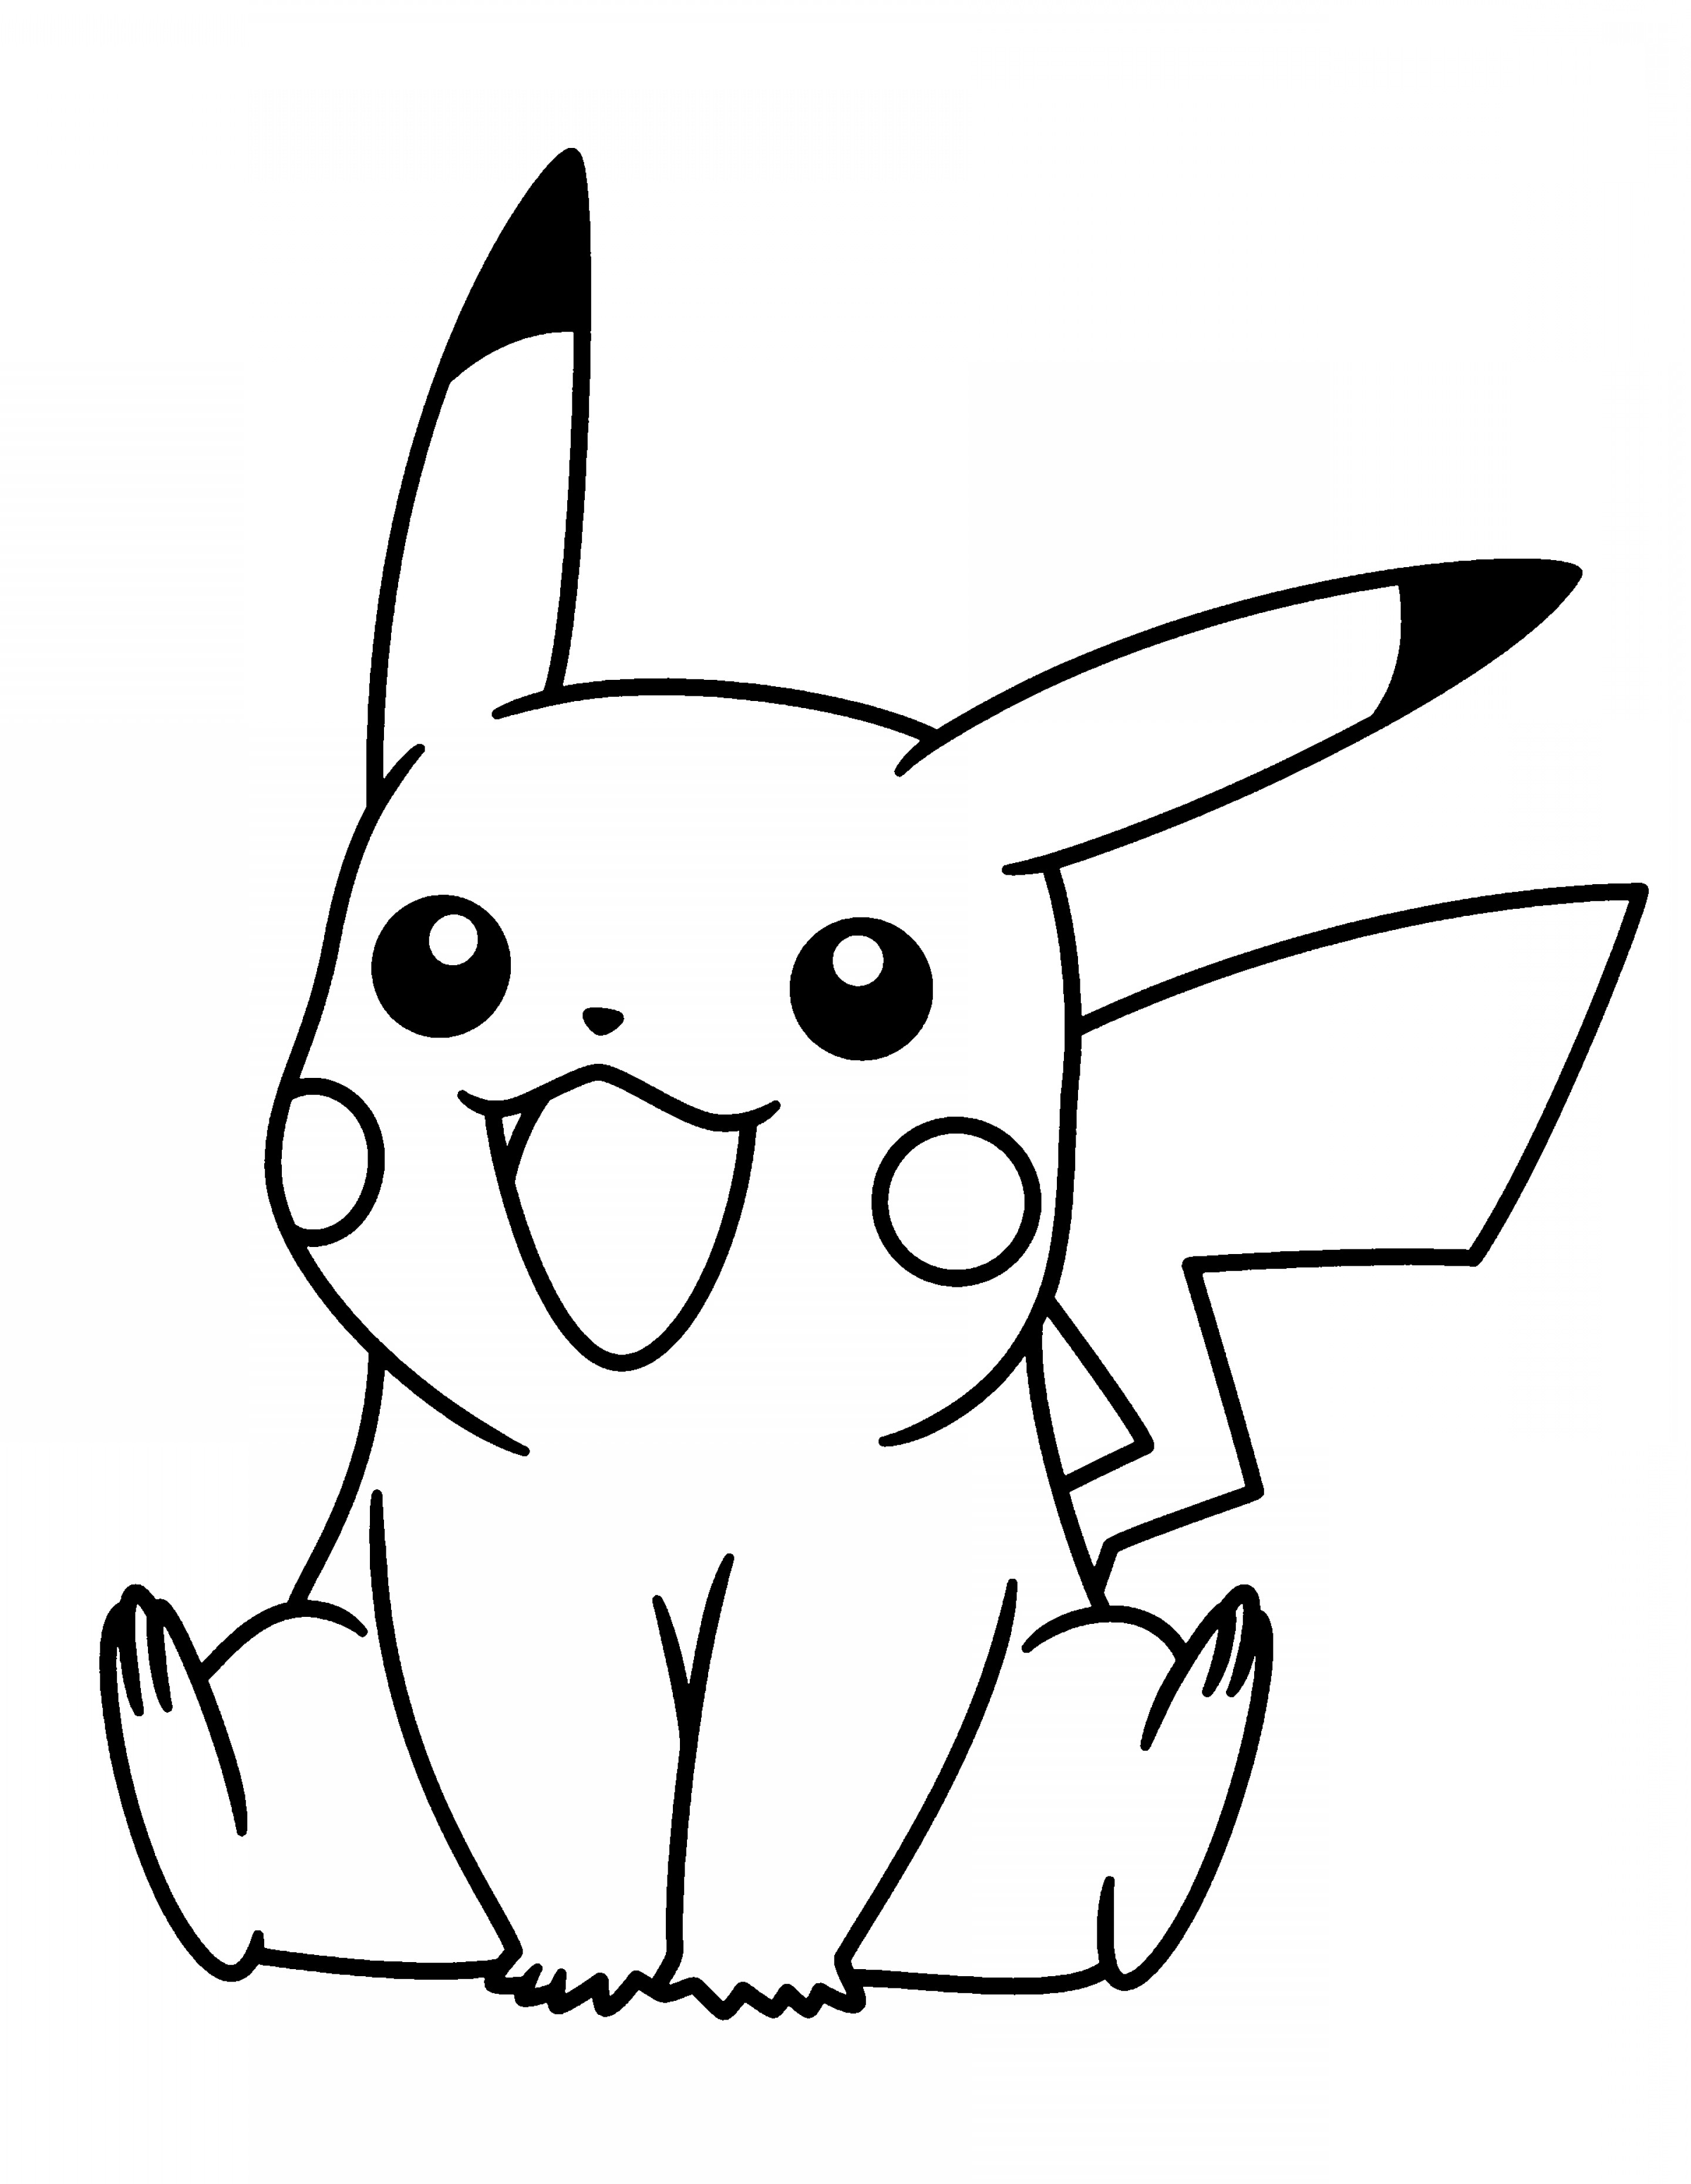 Pikachu Clipart Coloring Book Pikachu Coloring Book Transparent Free For Download On Webstockreview 2020 - image result for roblox ninja coloring pages pokemon